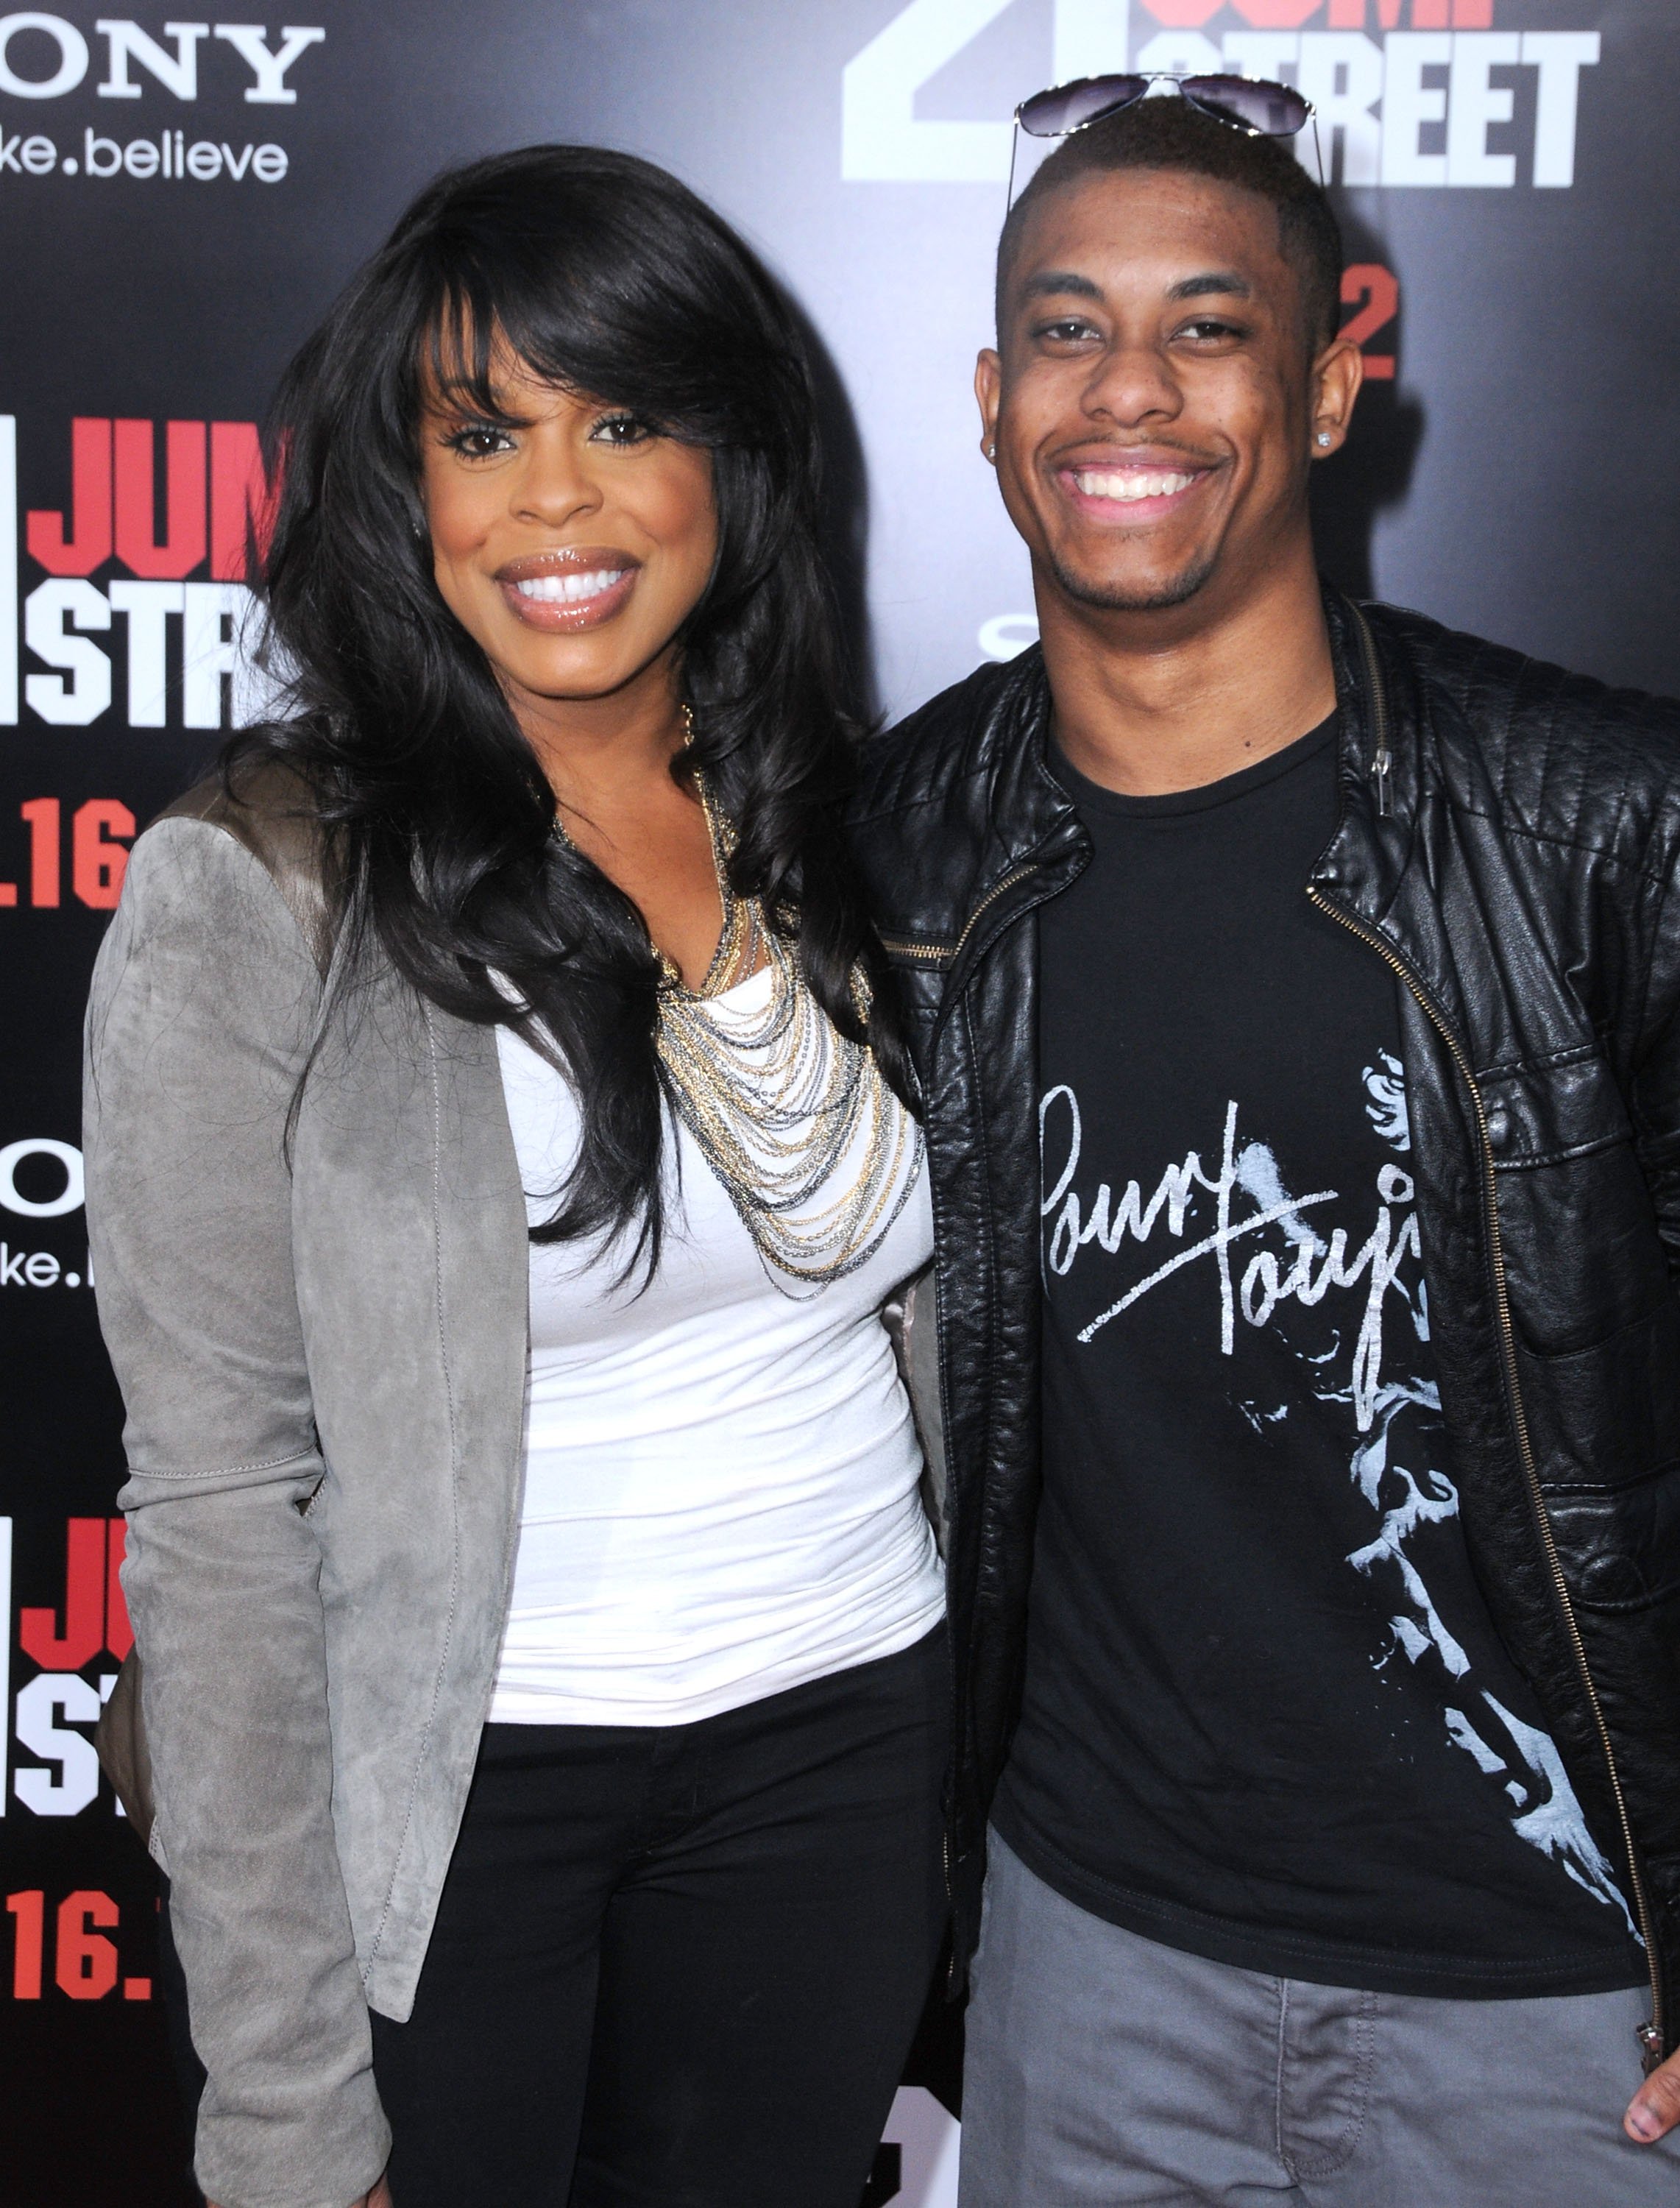 Niecy Nash and her son, Dominic Nash, pose as they arrive at the Los Angeles Premiere '21 Jumpstreet' at Grauman's Chinese Theatre on March 13, 2012, in Hollywood, California | Source: Getty Images